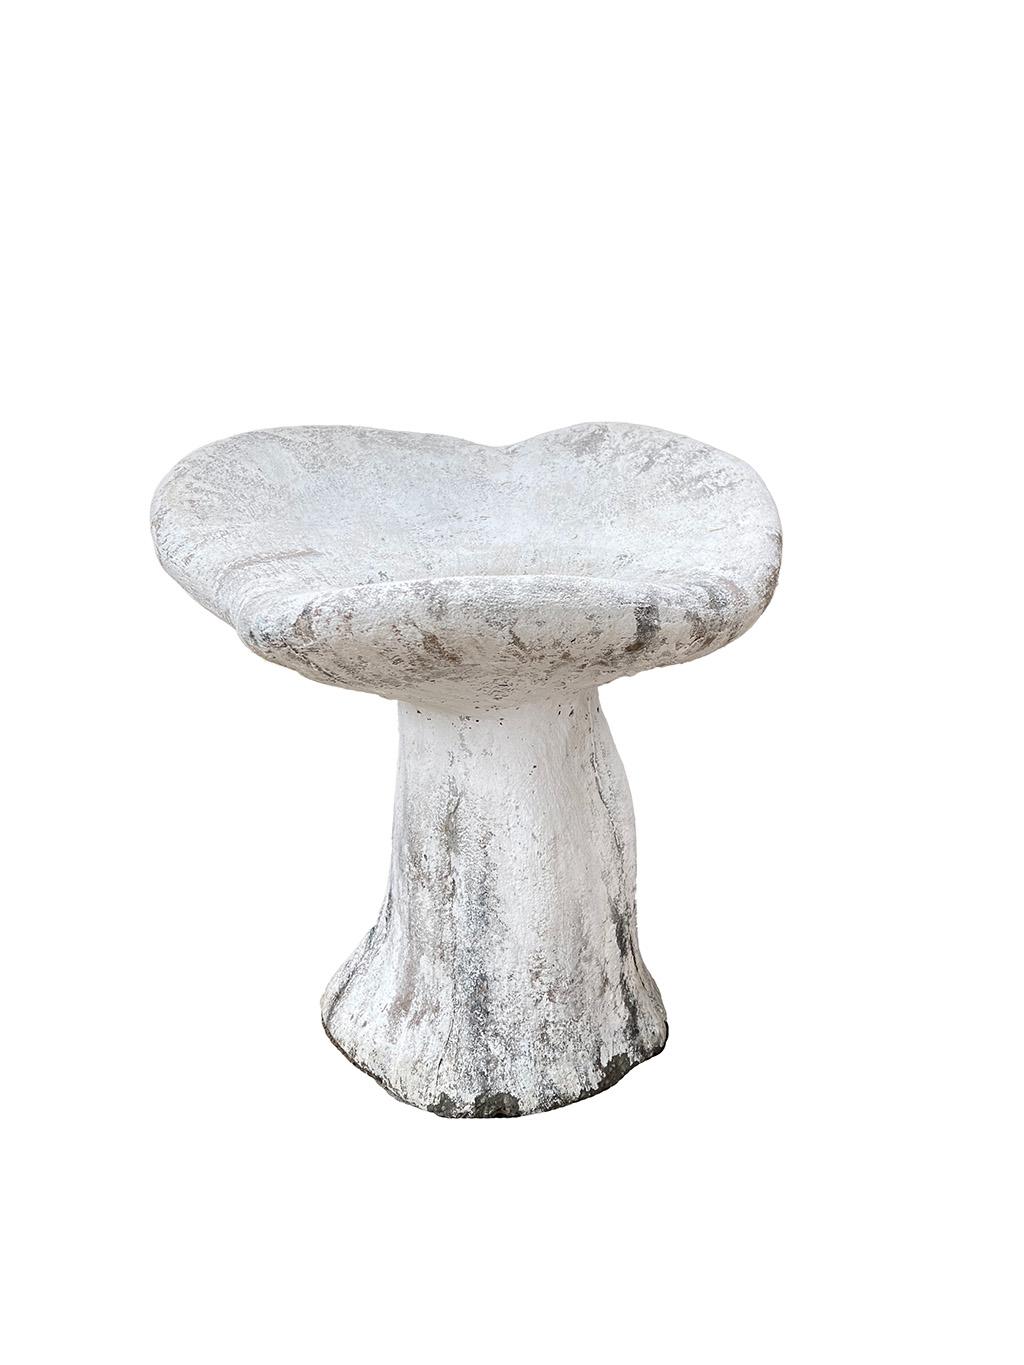 French Vintage Cement Mushroom Seats, a Pair